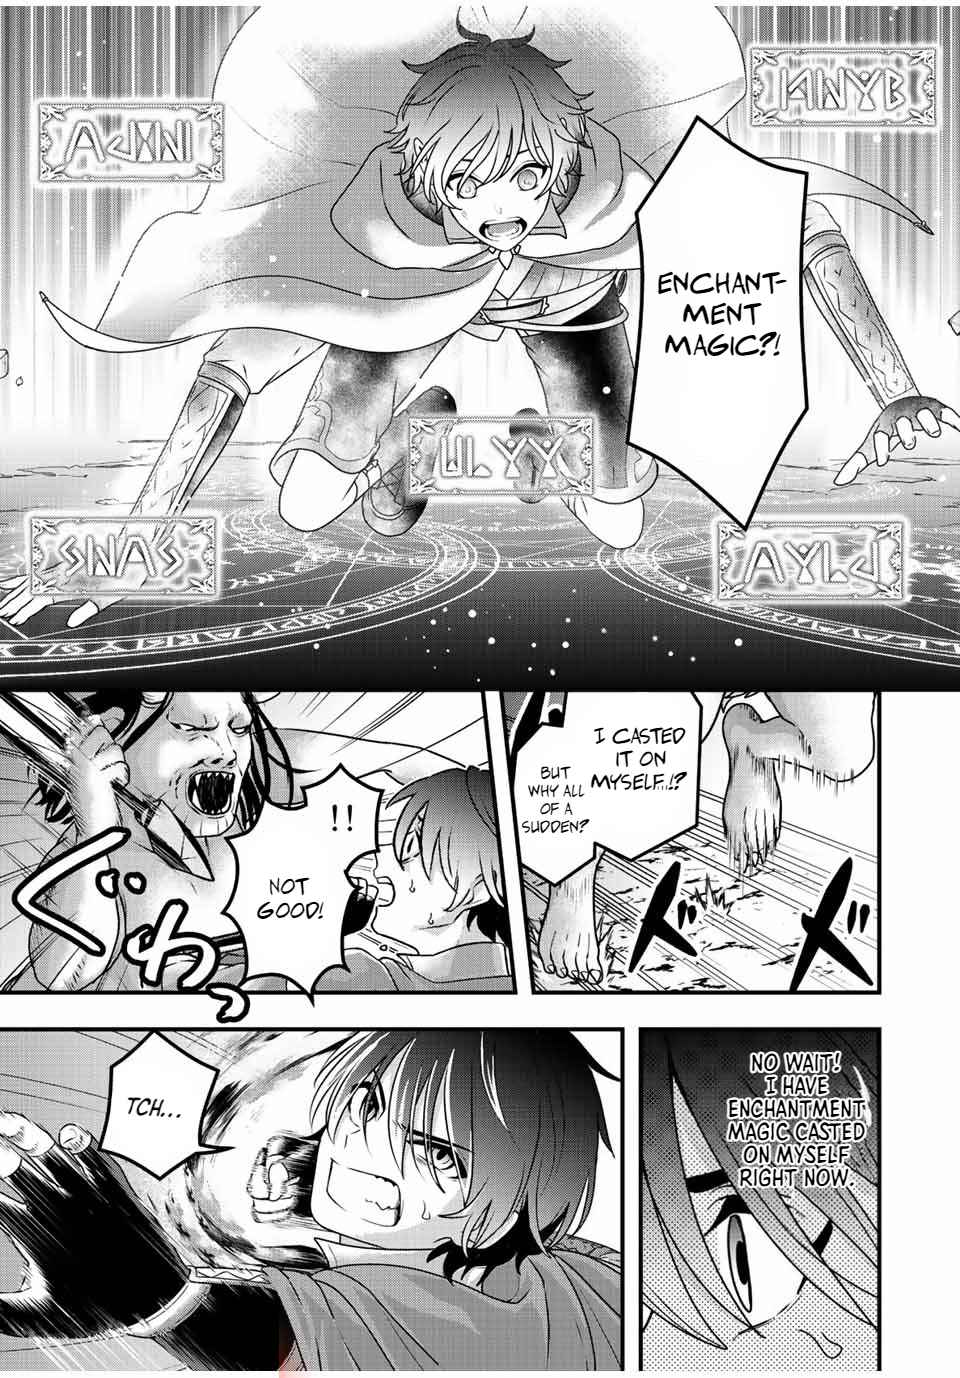 The Story Of The Banisher Side After Banishing The Party Member - The Party Was Weakened, But We Aim To Be The Best In The World Chapter 2-eng-li - Page 7